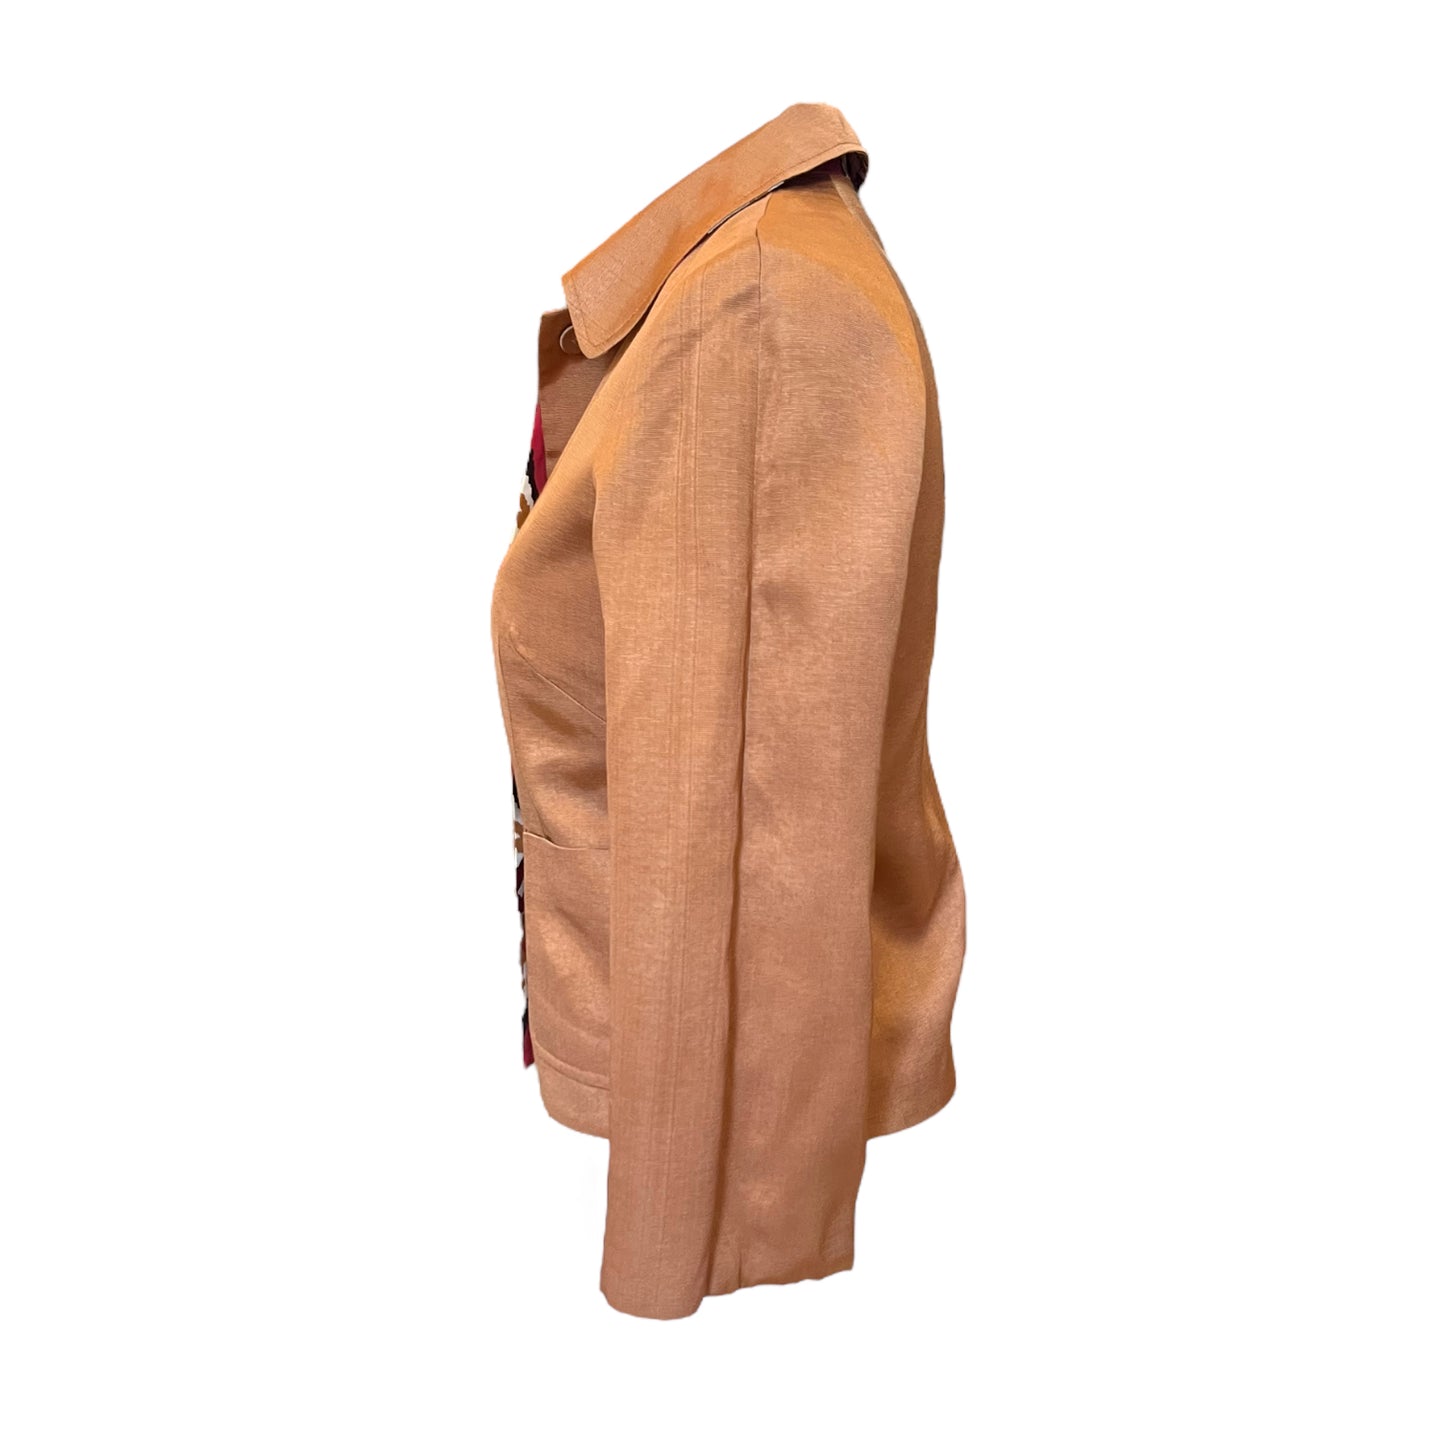 Day Birger Rust and Burgundy Reversible Jacket